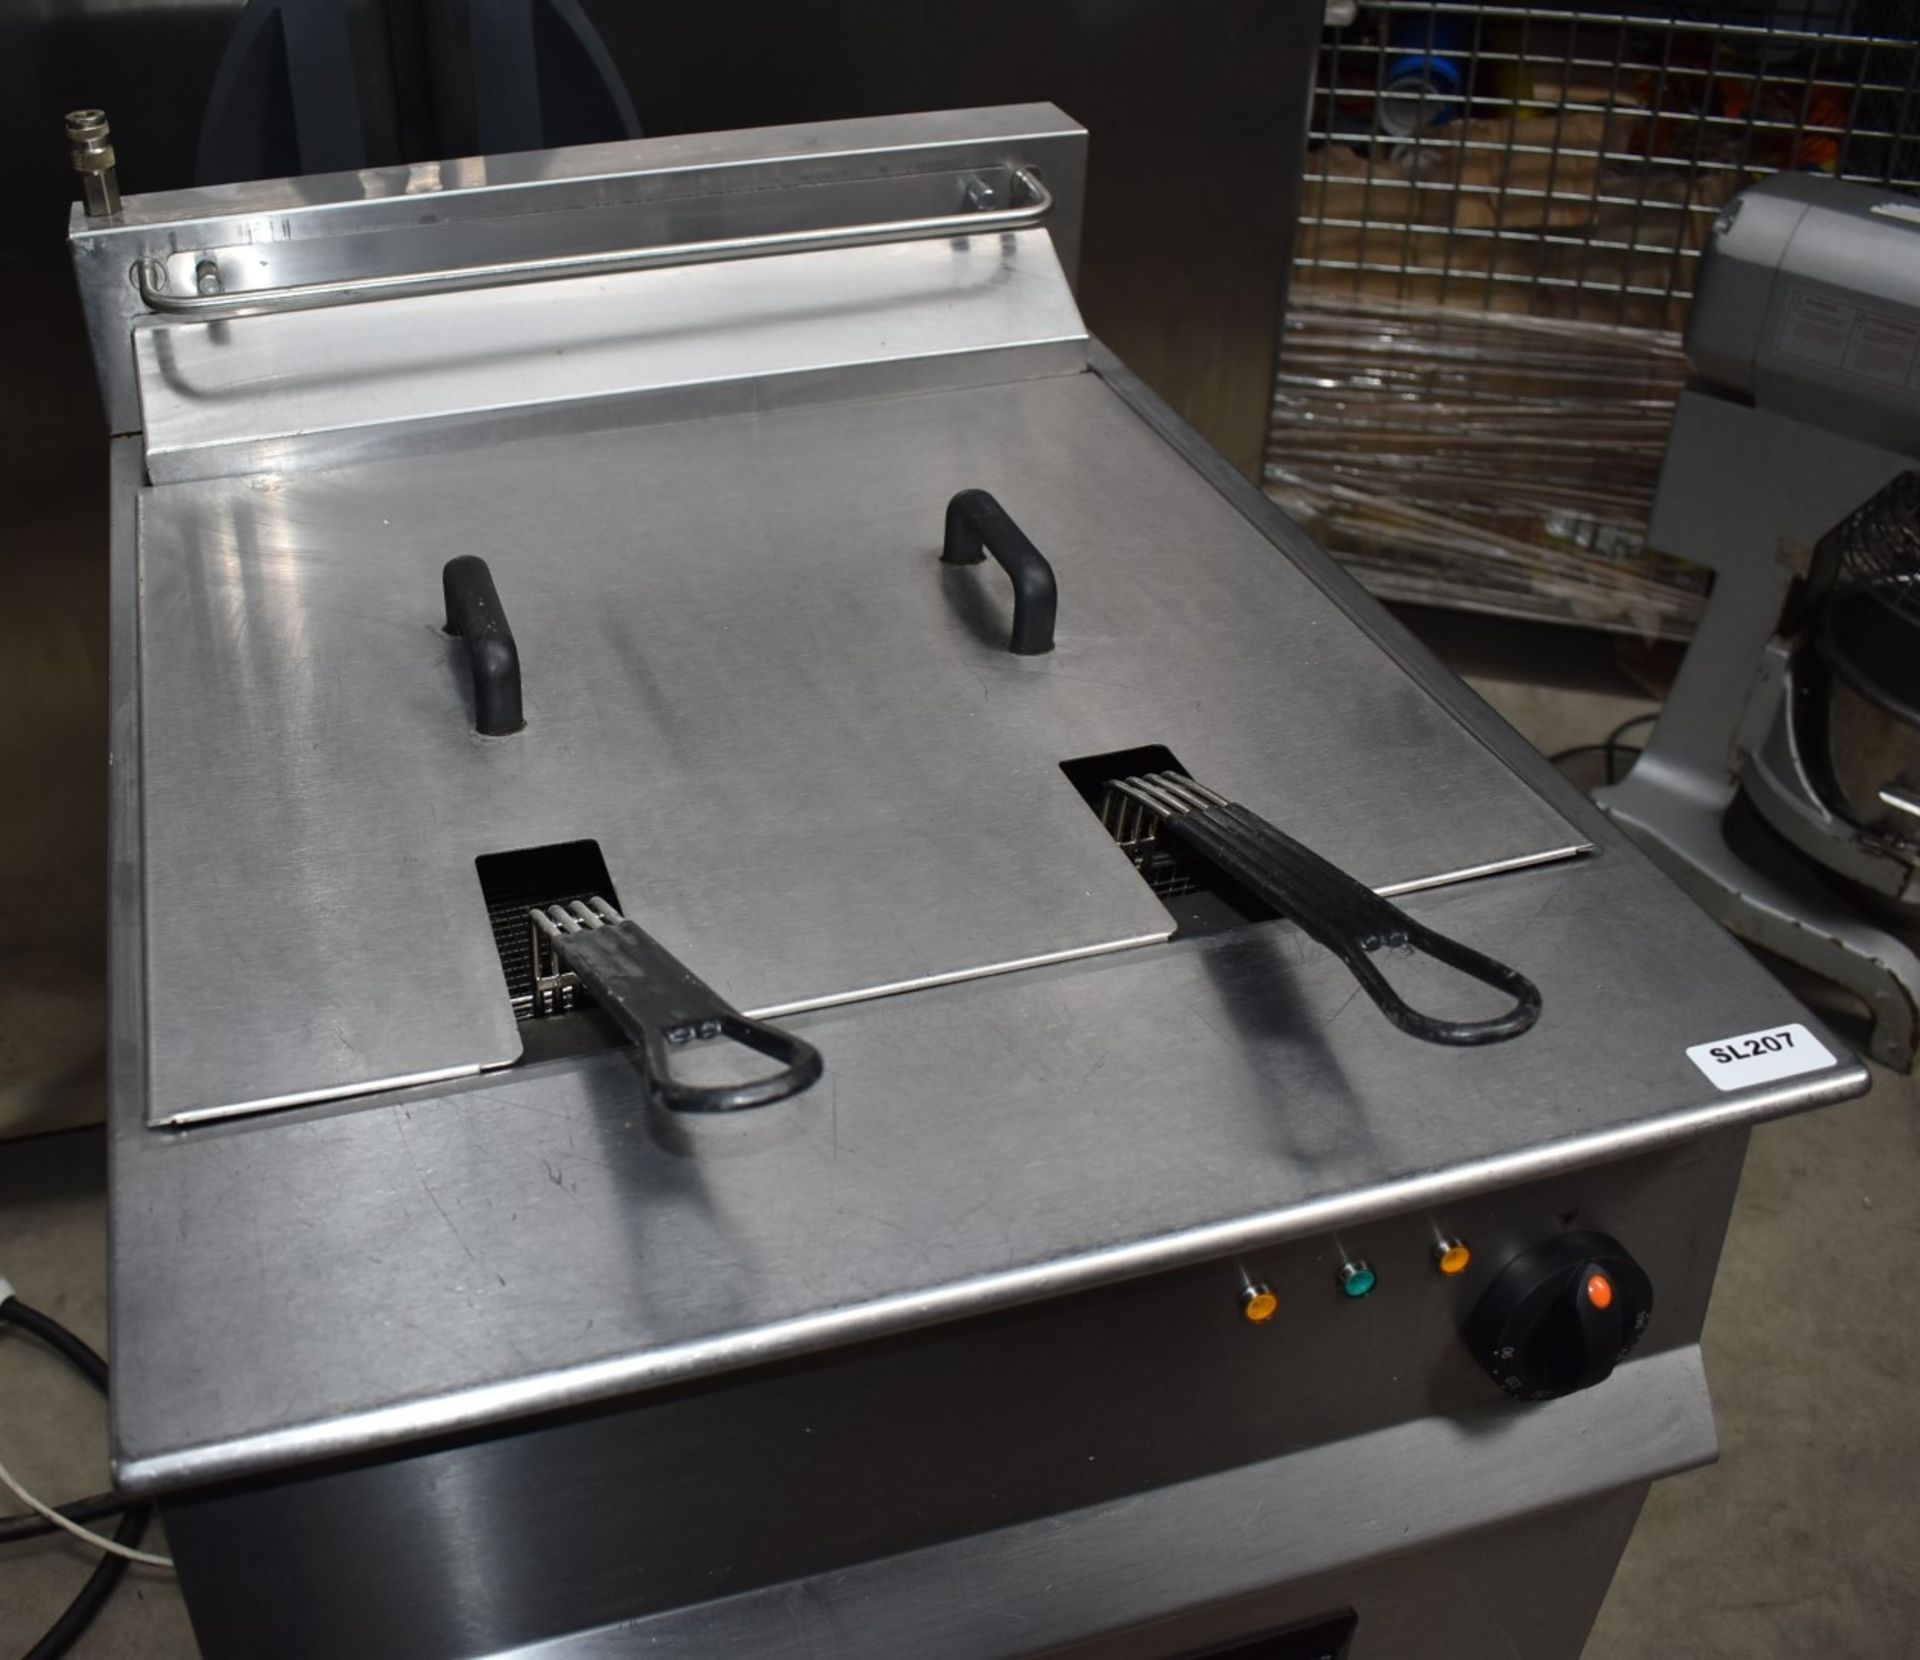 1 x Lincat Opus 800 OE8108 Single Tank Electric Fryer With Filtration - 37L Tank With Two - Image 12 of 17